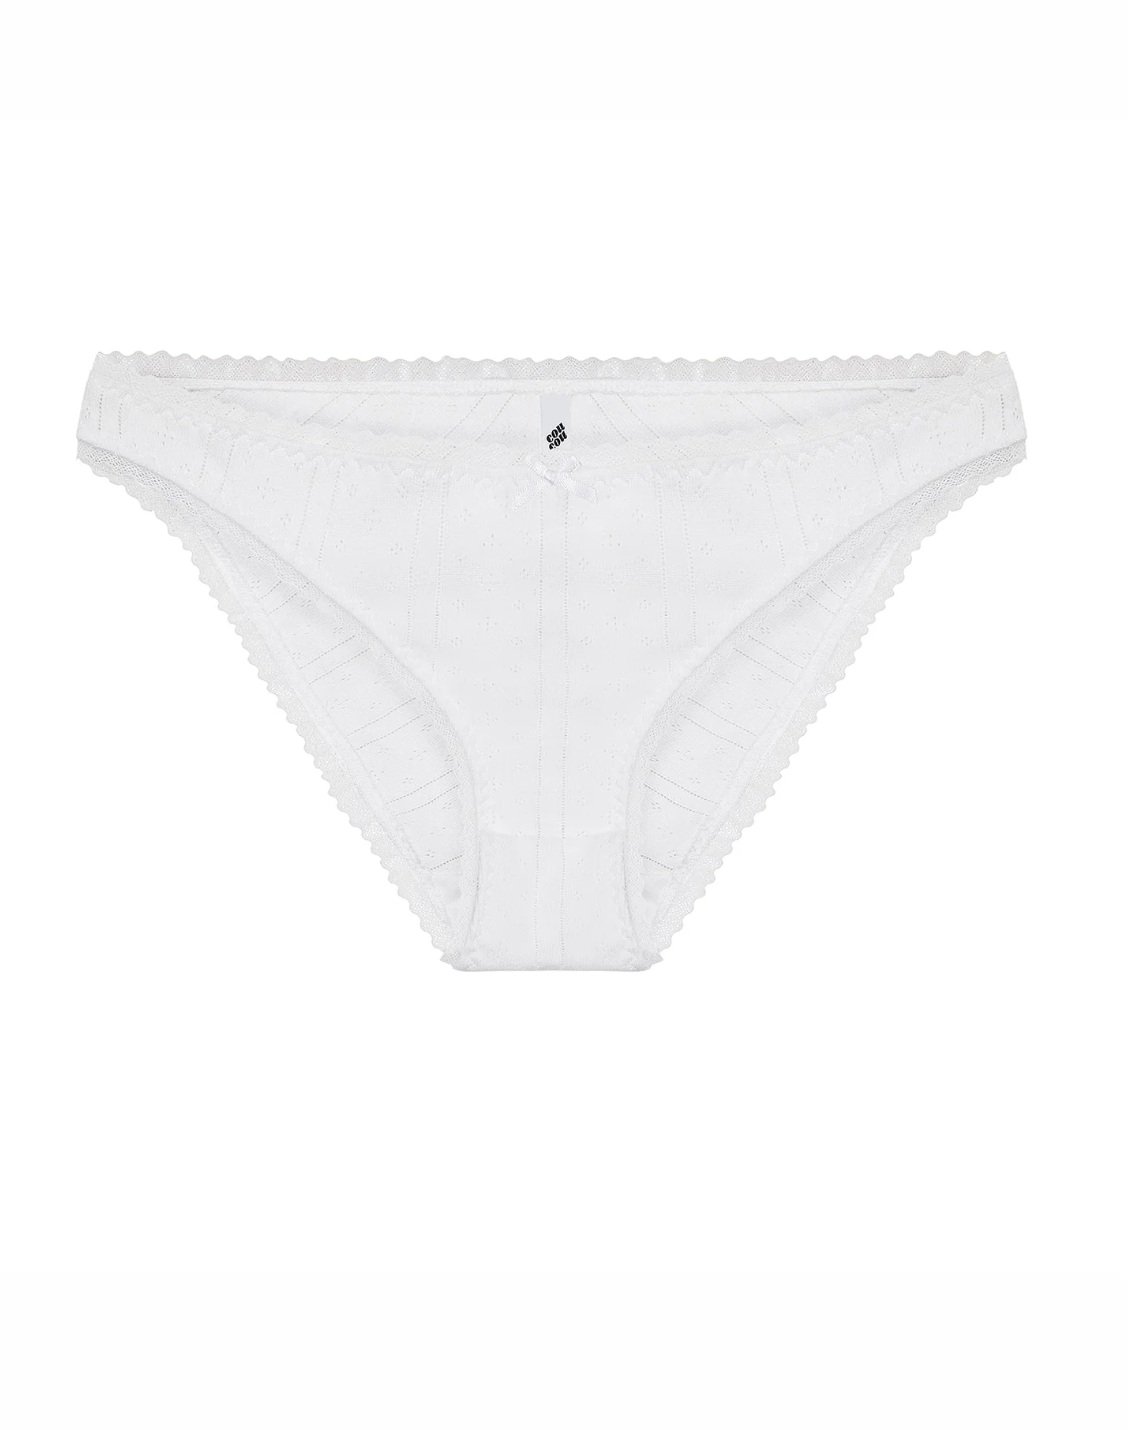 Where To Buy Sustainable, Compostable Cotton Underwear